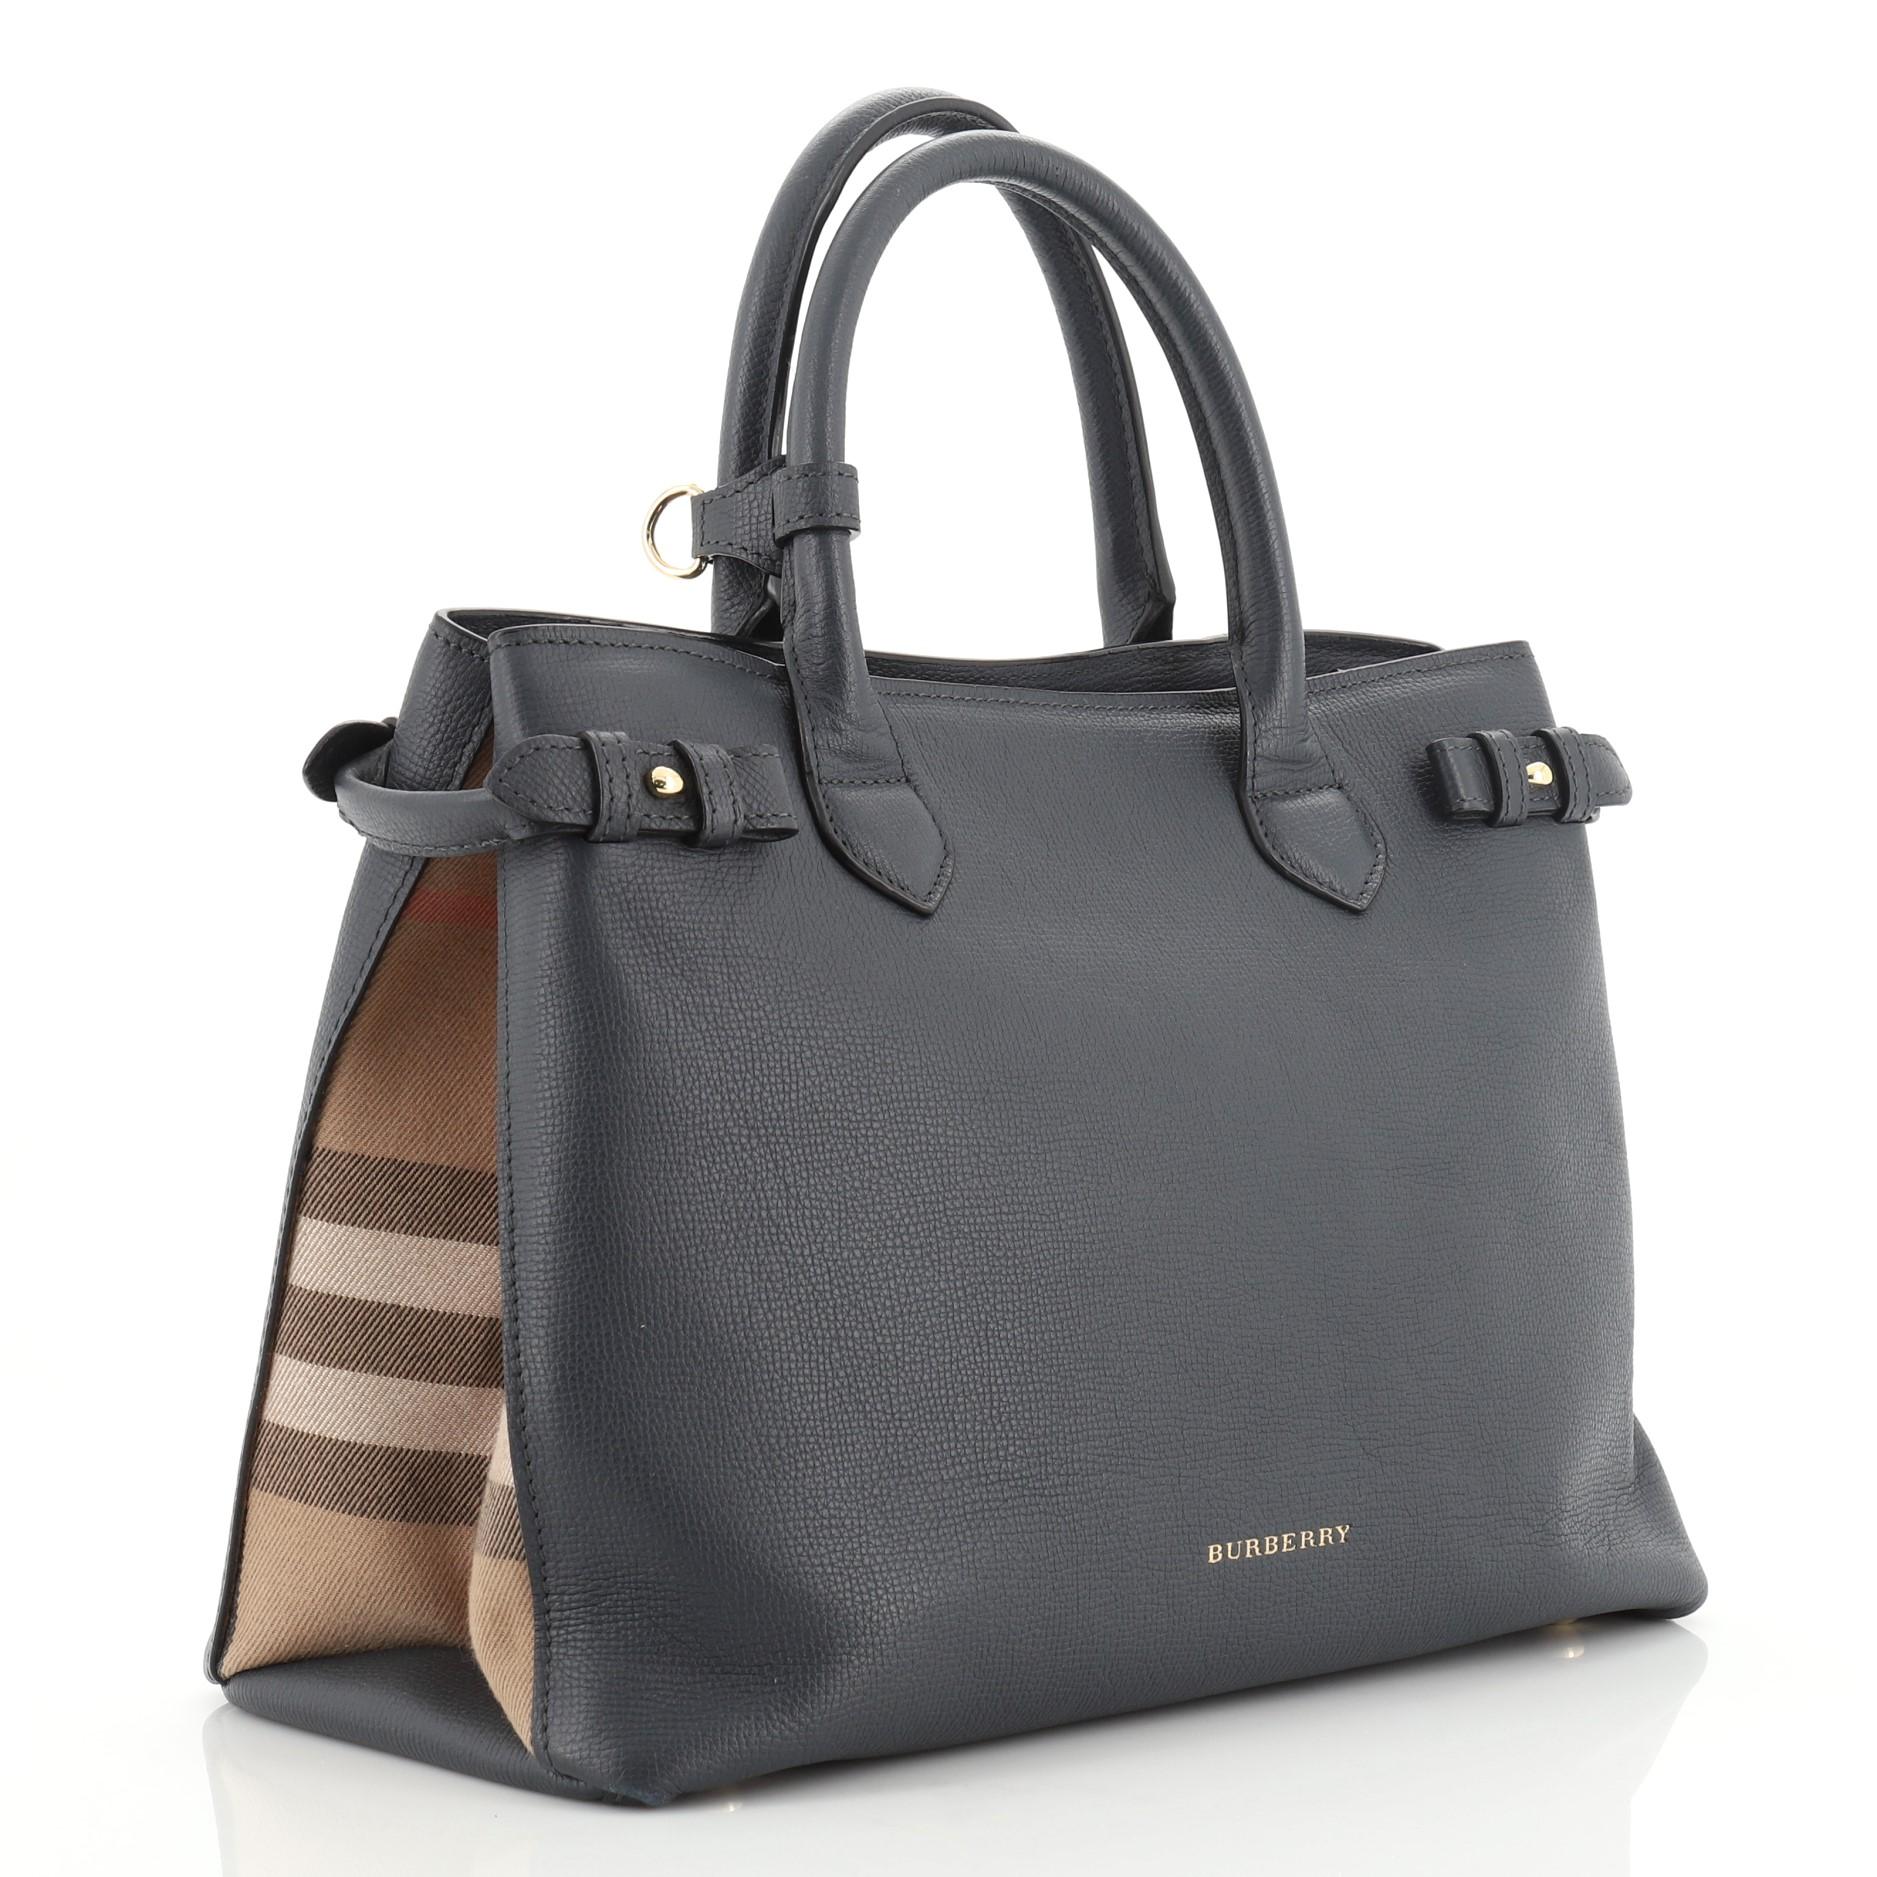 This Burberry Banner Convertible Tote Leather and House Check Canvas Medium, crafted in blue leather and house check canvas, features dual rolled handles, stamped Burberry logo, house check canvas side panels, protective base studs and gold-tone